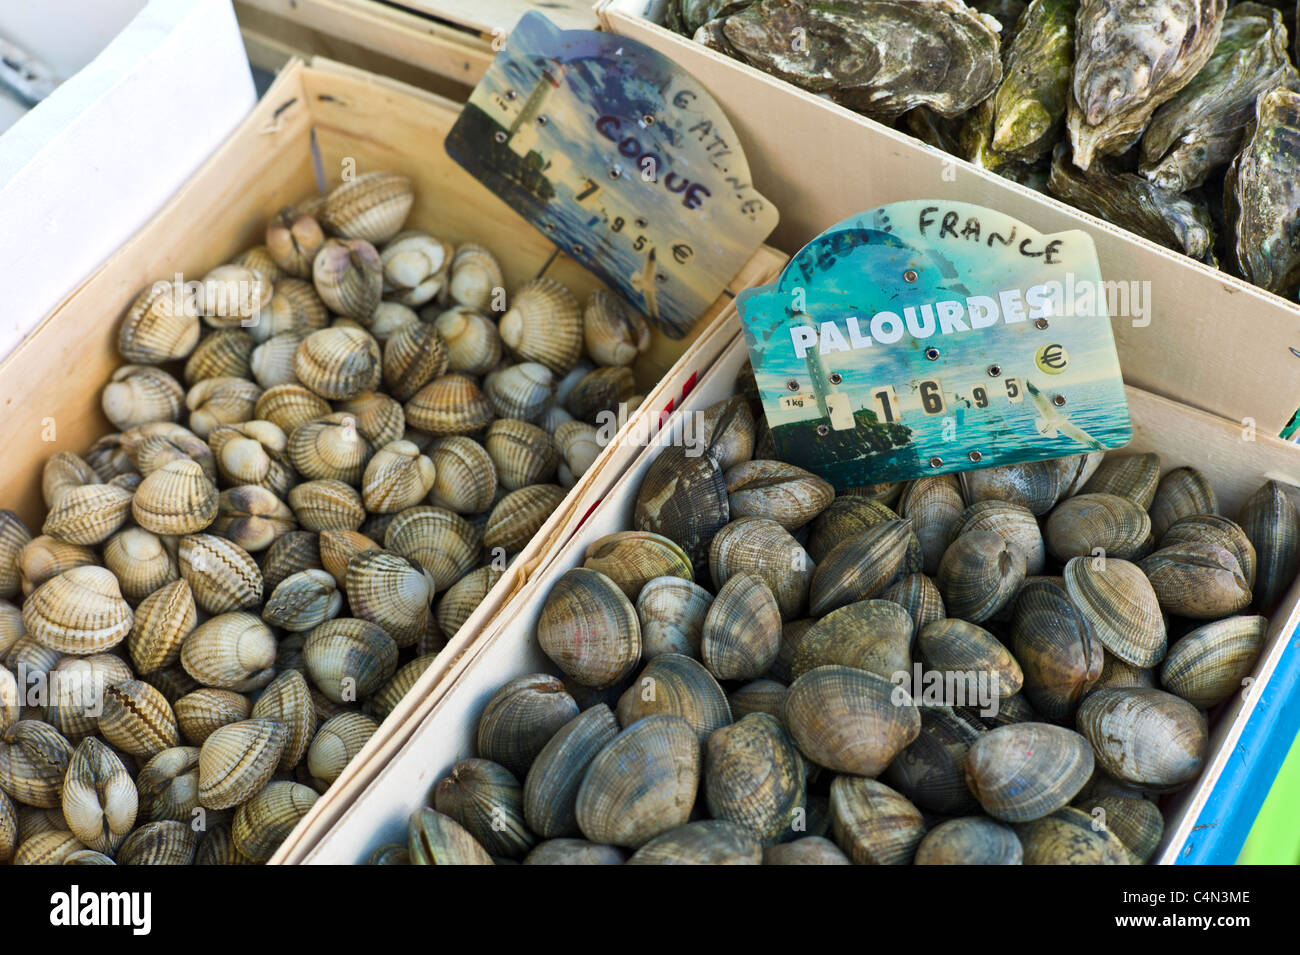 Live clams, cockles and oysters, palourdes, coque, huitres, on sale at food market at La Reole in Bordeaux region of France Stock Photo